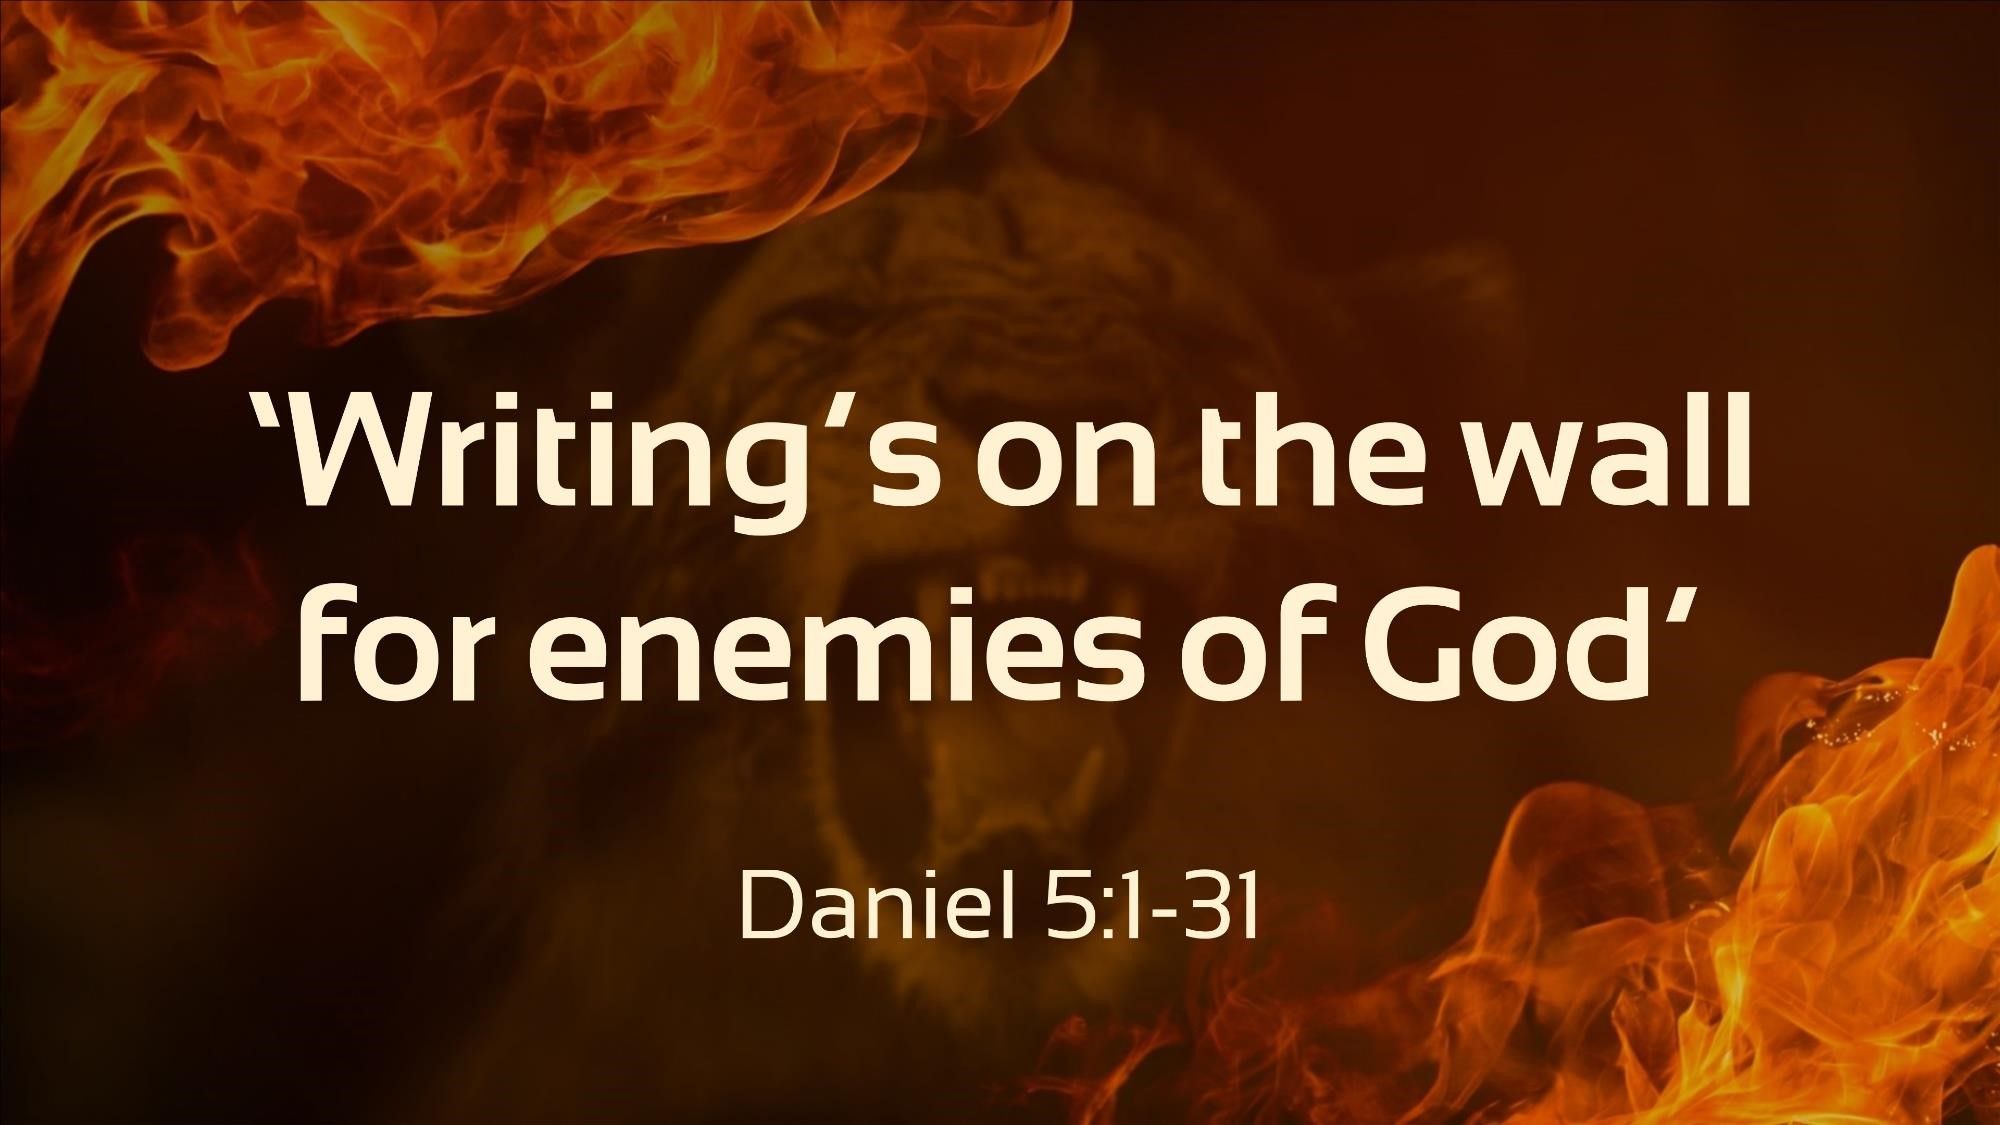 Writing’s on the wall for enemies of God